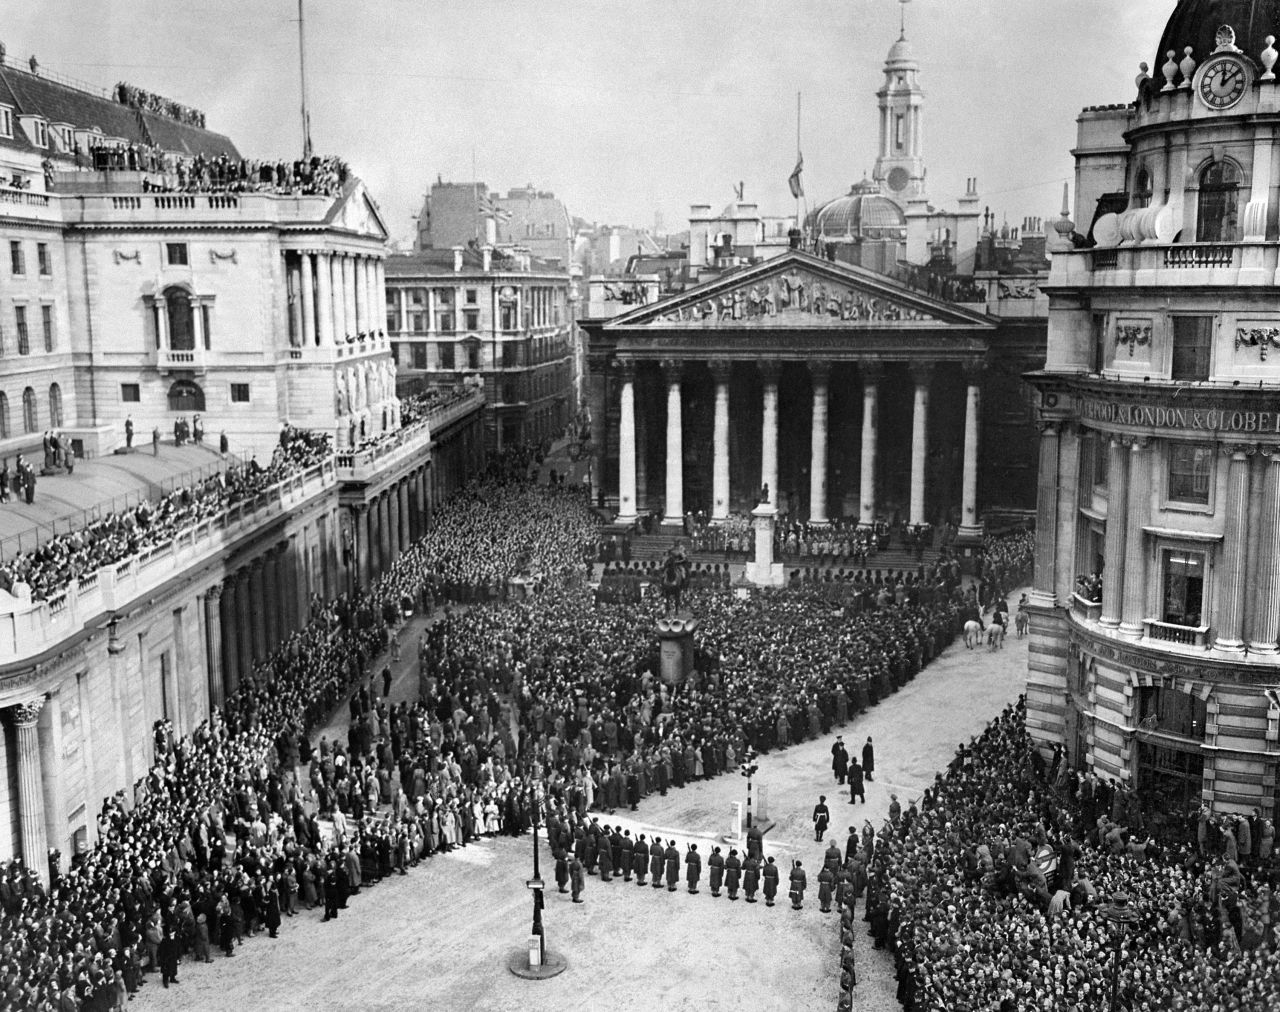 A ceremony for the proclamation is held on February 8, 1952.